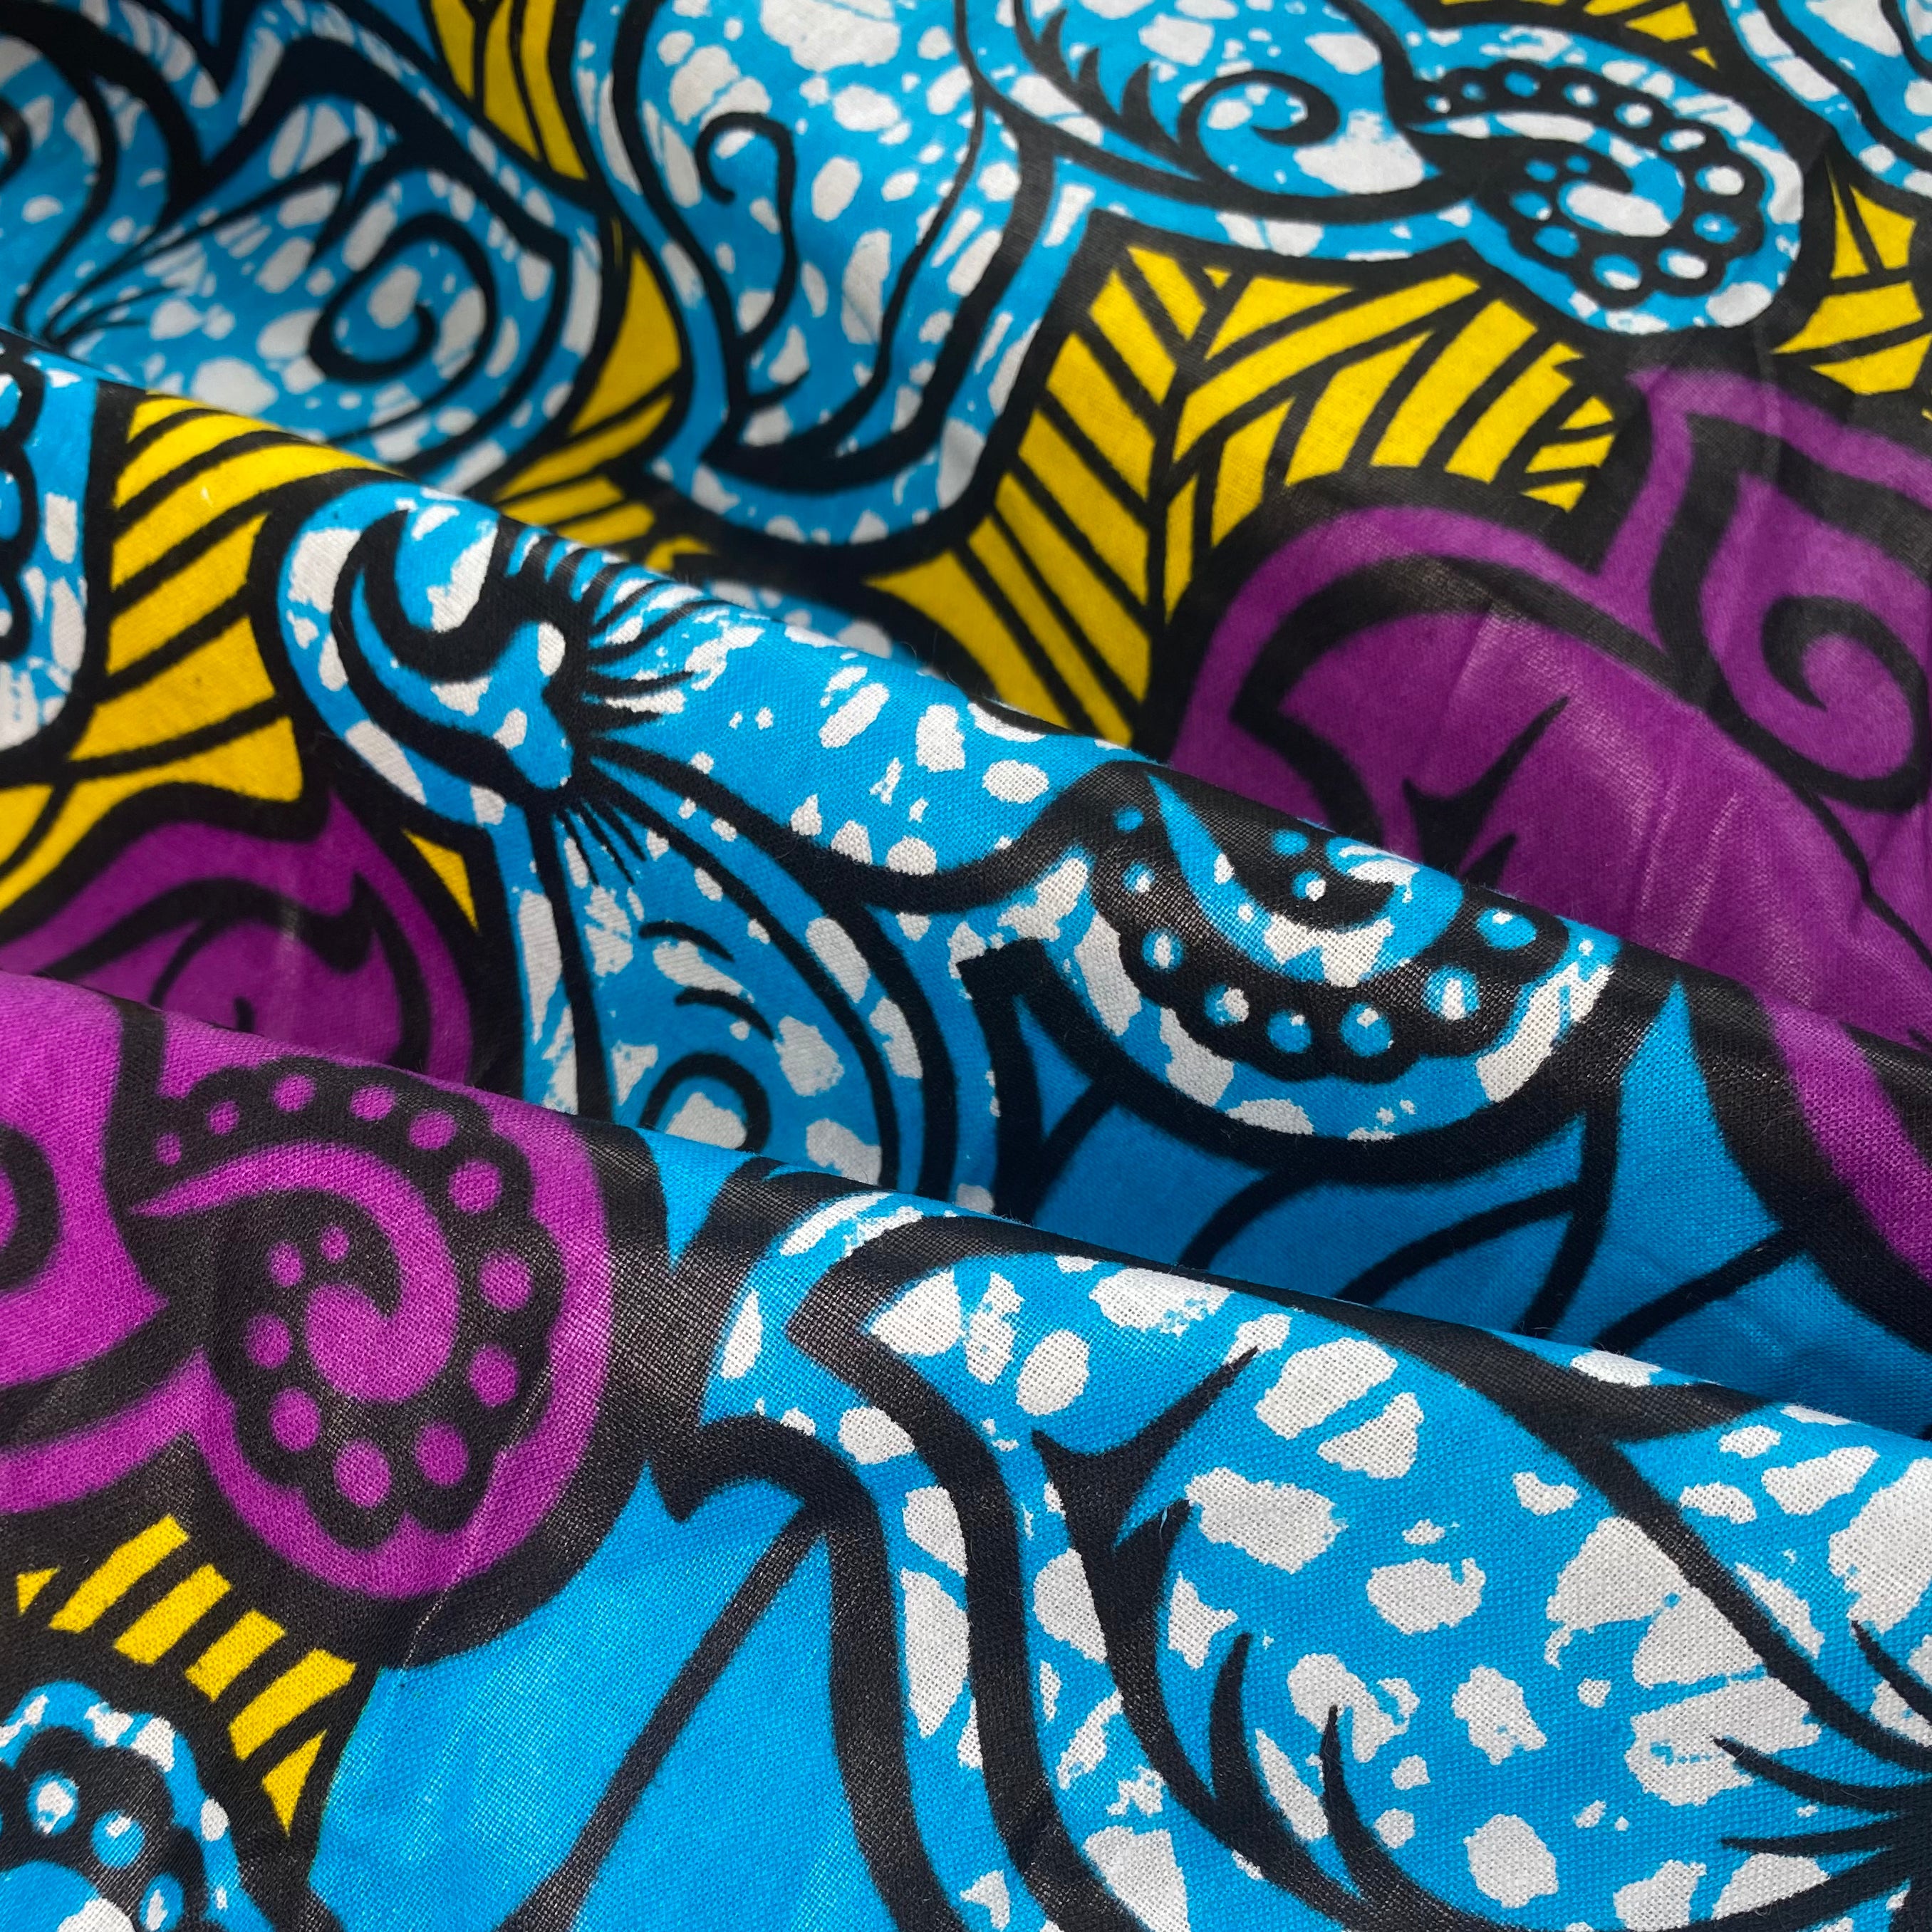 Waxed African Printed Cotton - Floral - Multi-Colour / Blue / Purple